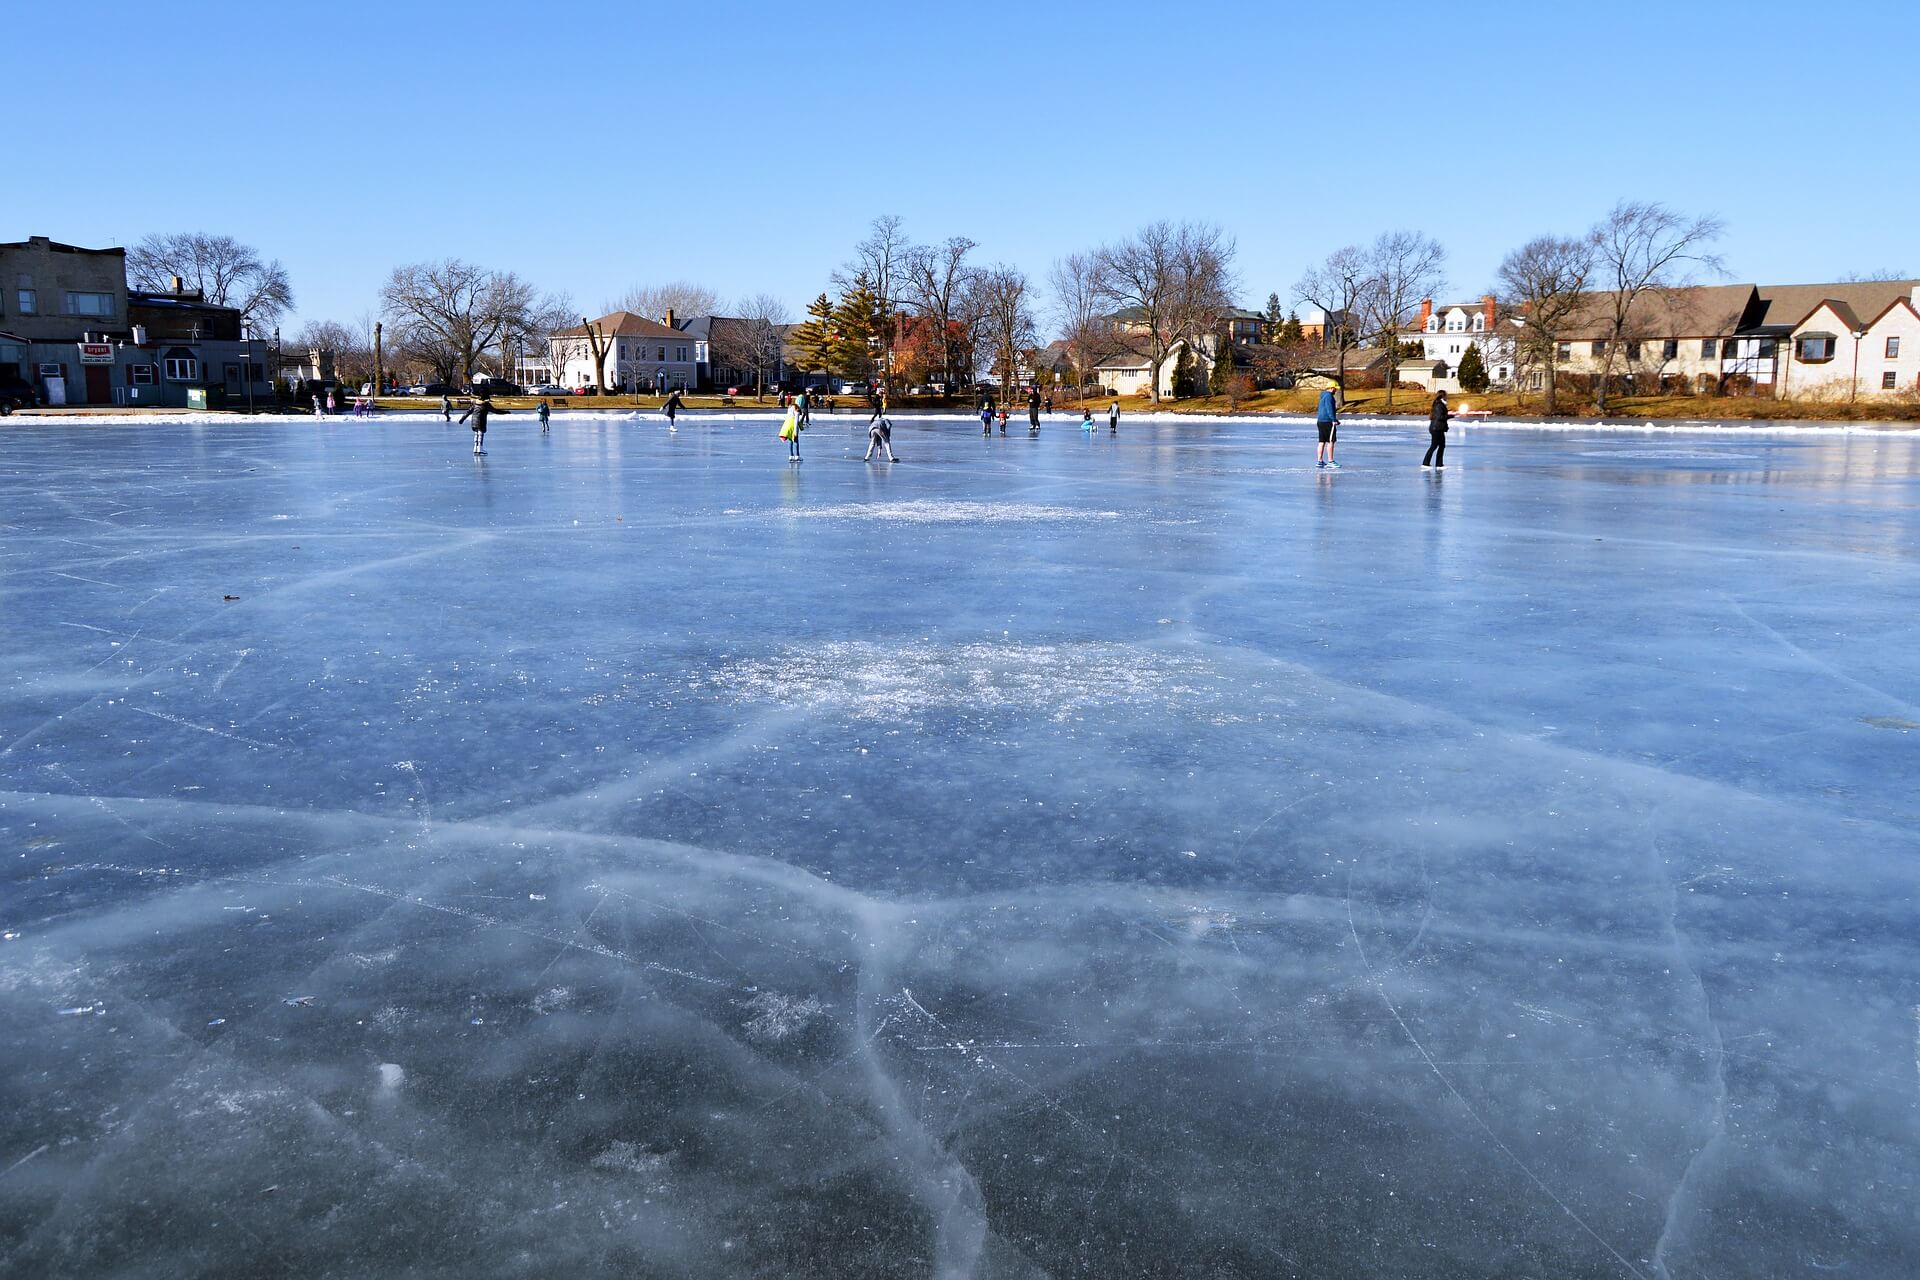 You're On Thin Ice If You Don't Know These Safety Tips!